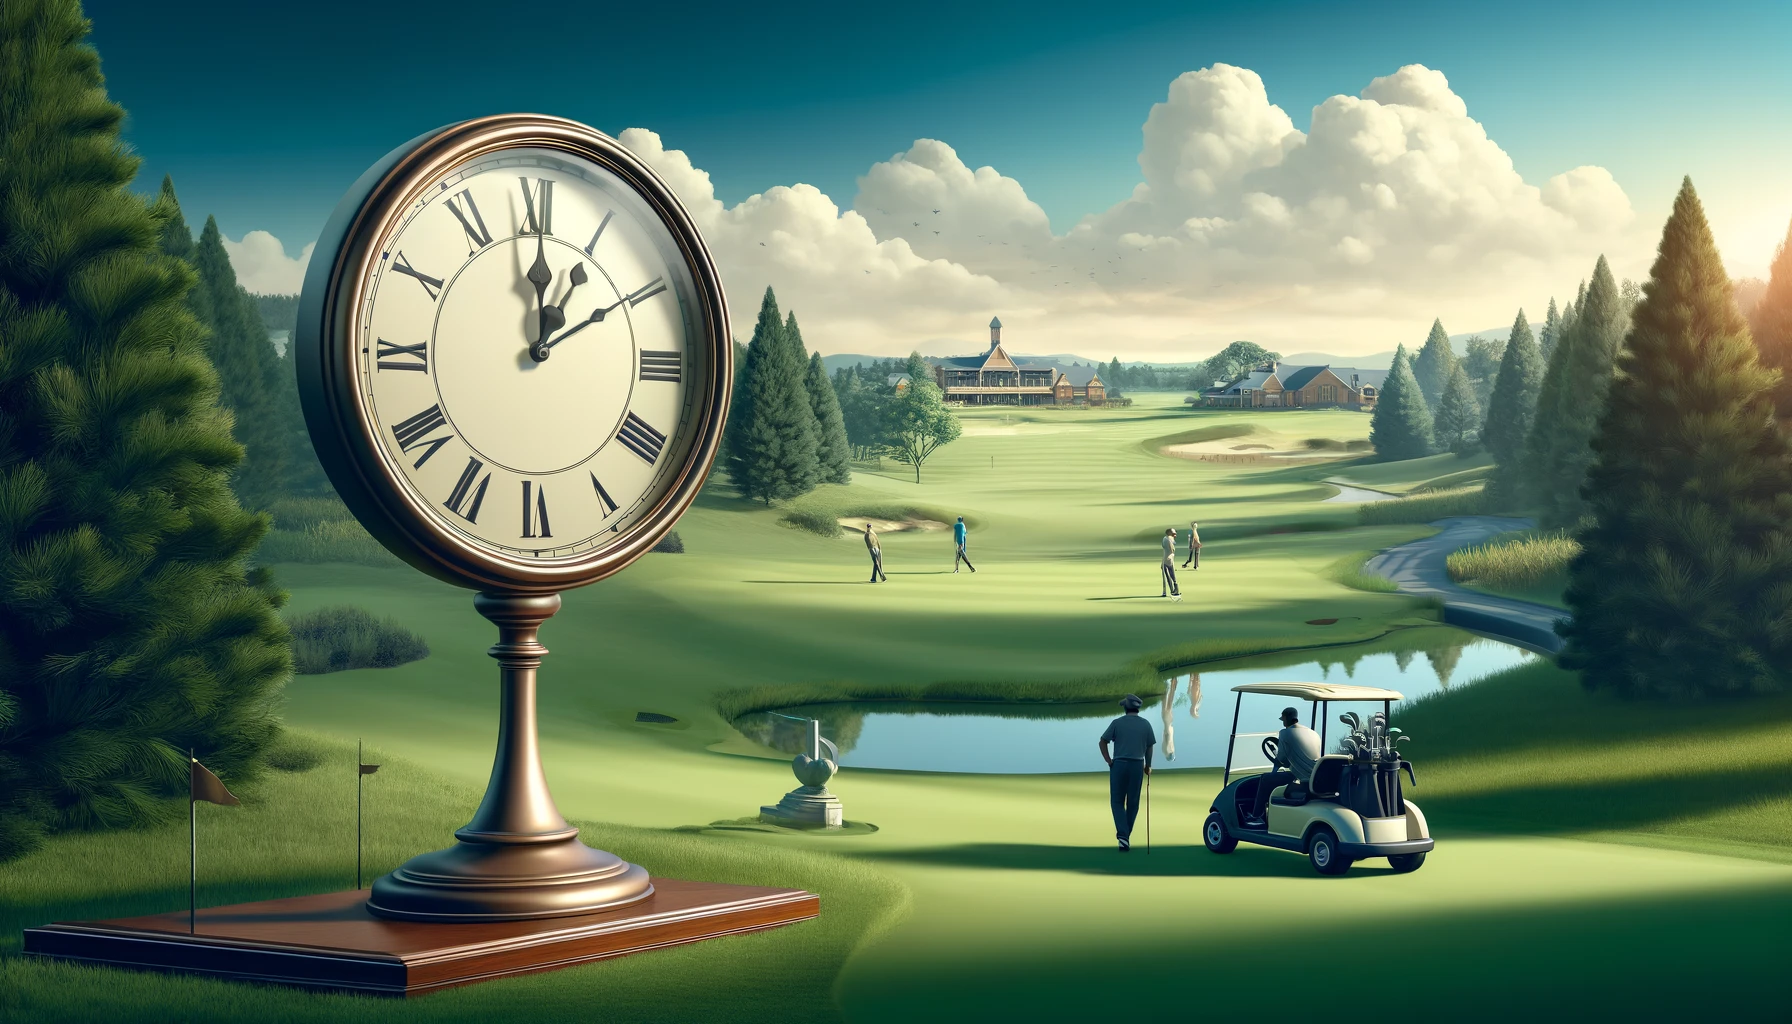 How long does it take to golf 18 holes?